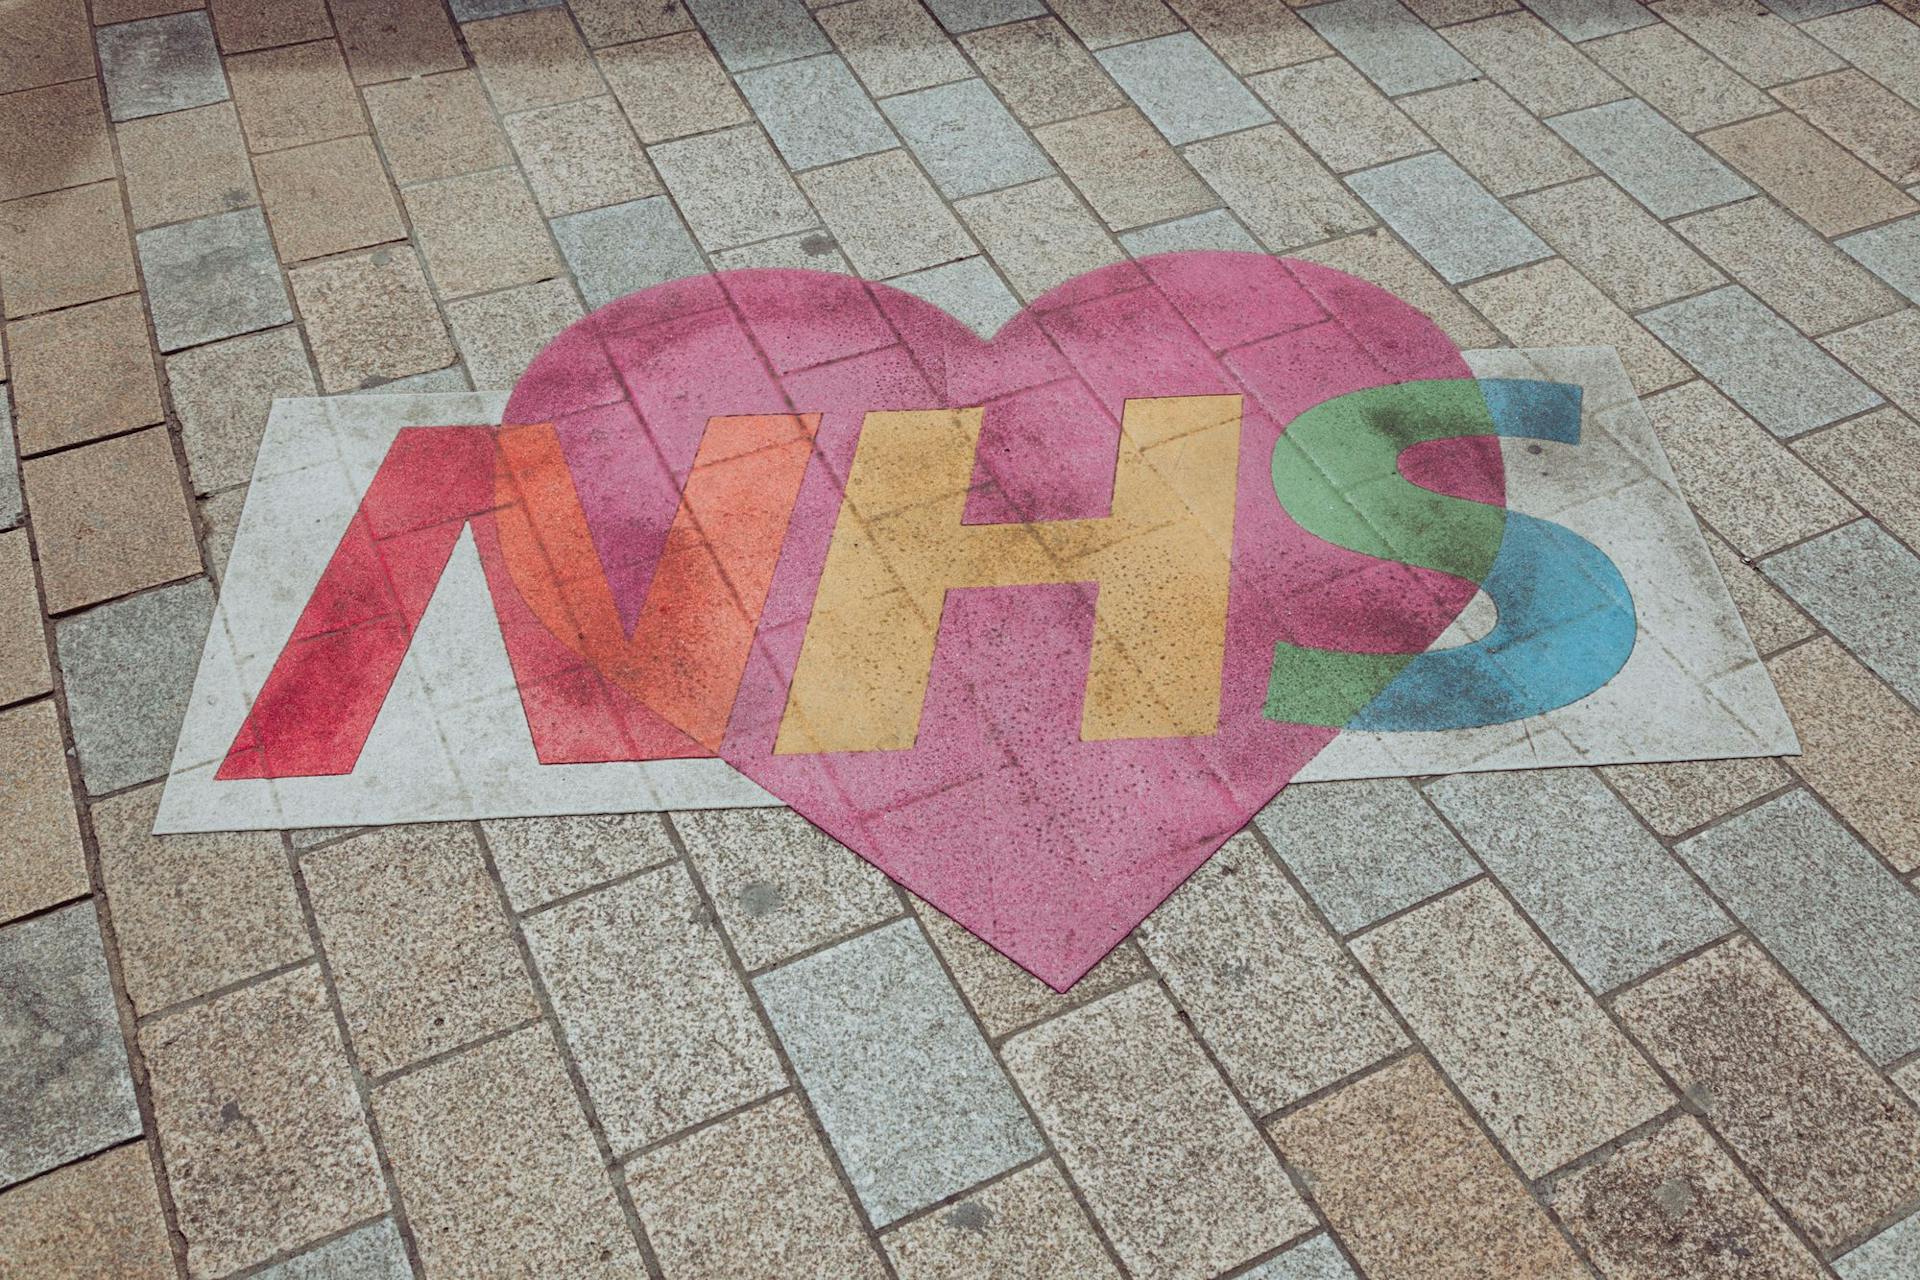 Spread love and support with NHS Valentine's Day cards